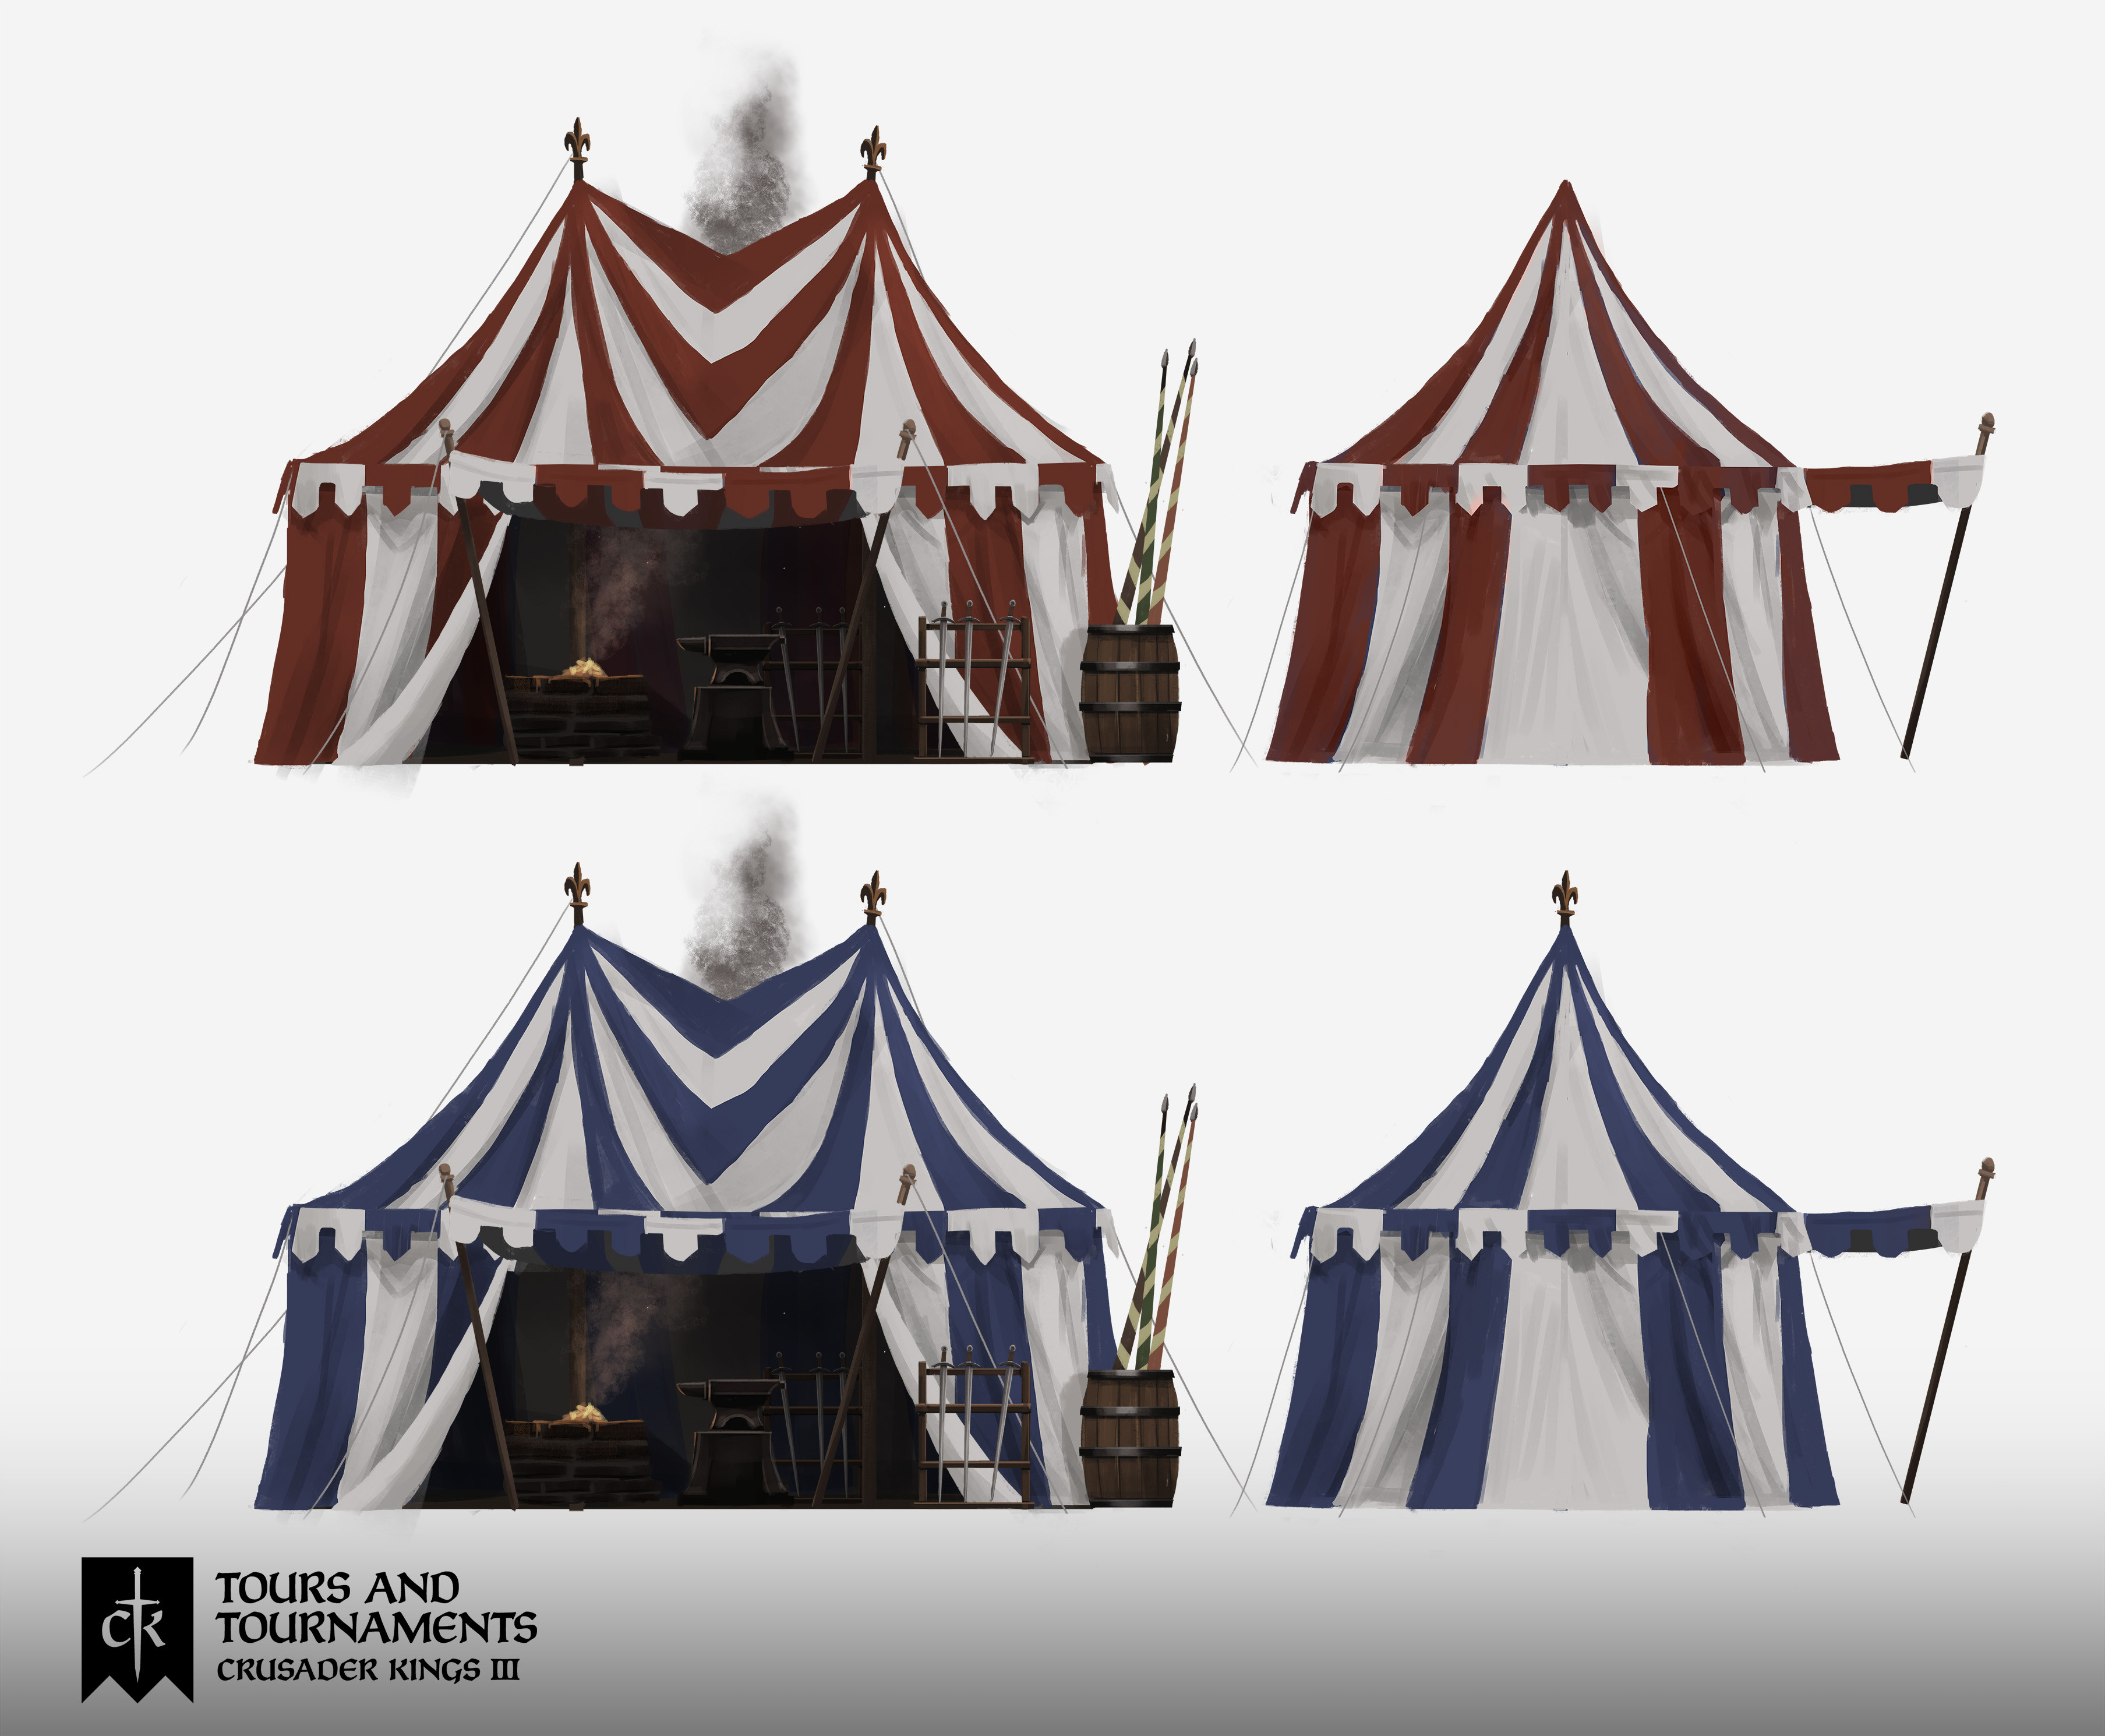 Red and blue tents